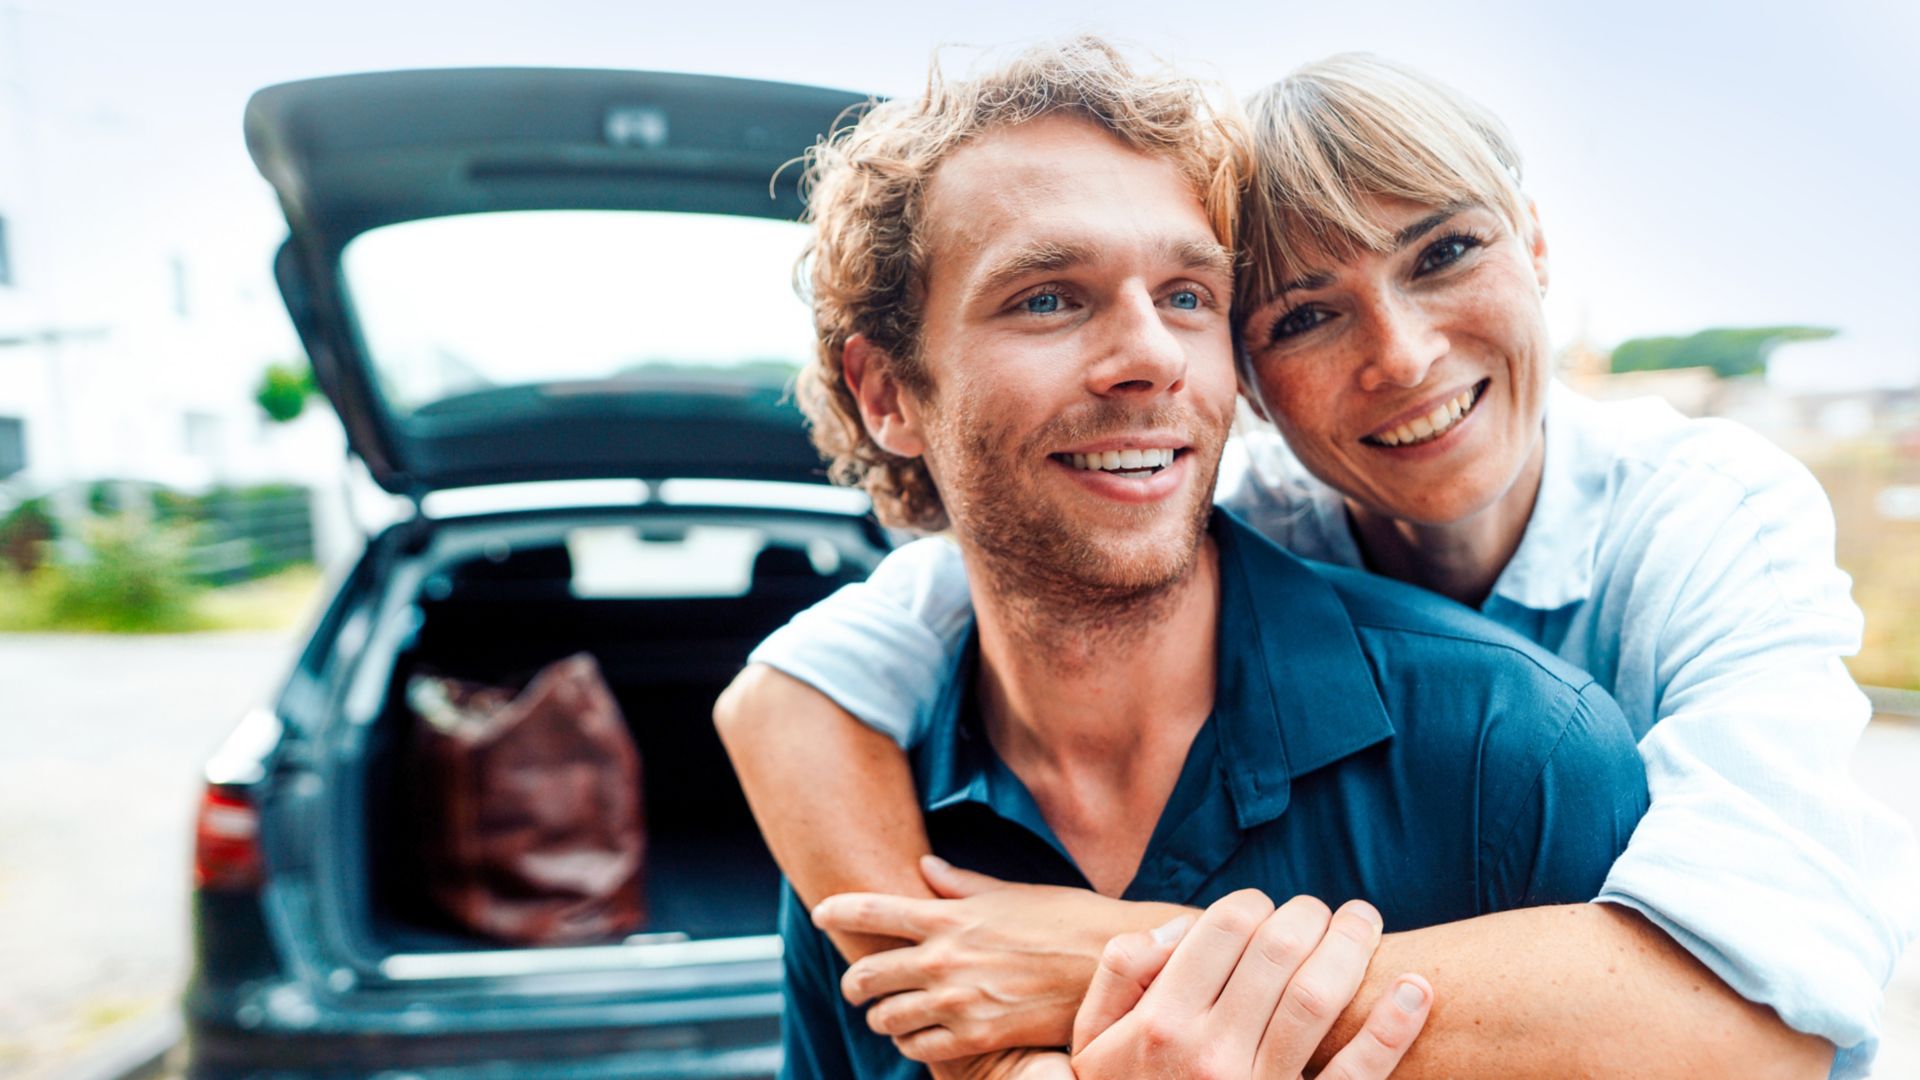 Smiling woman embracing man on vacation